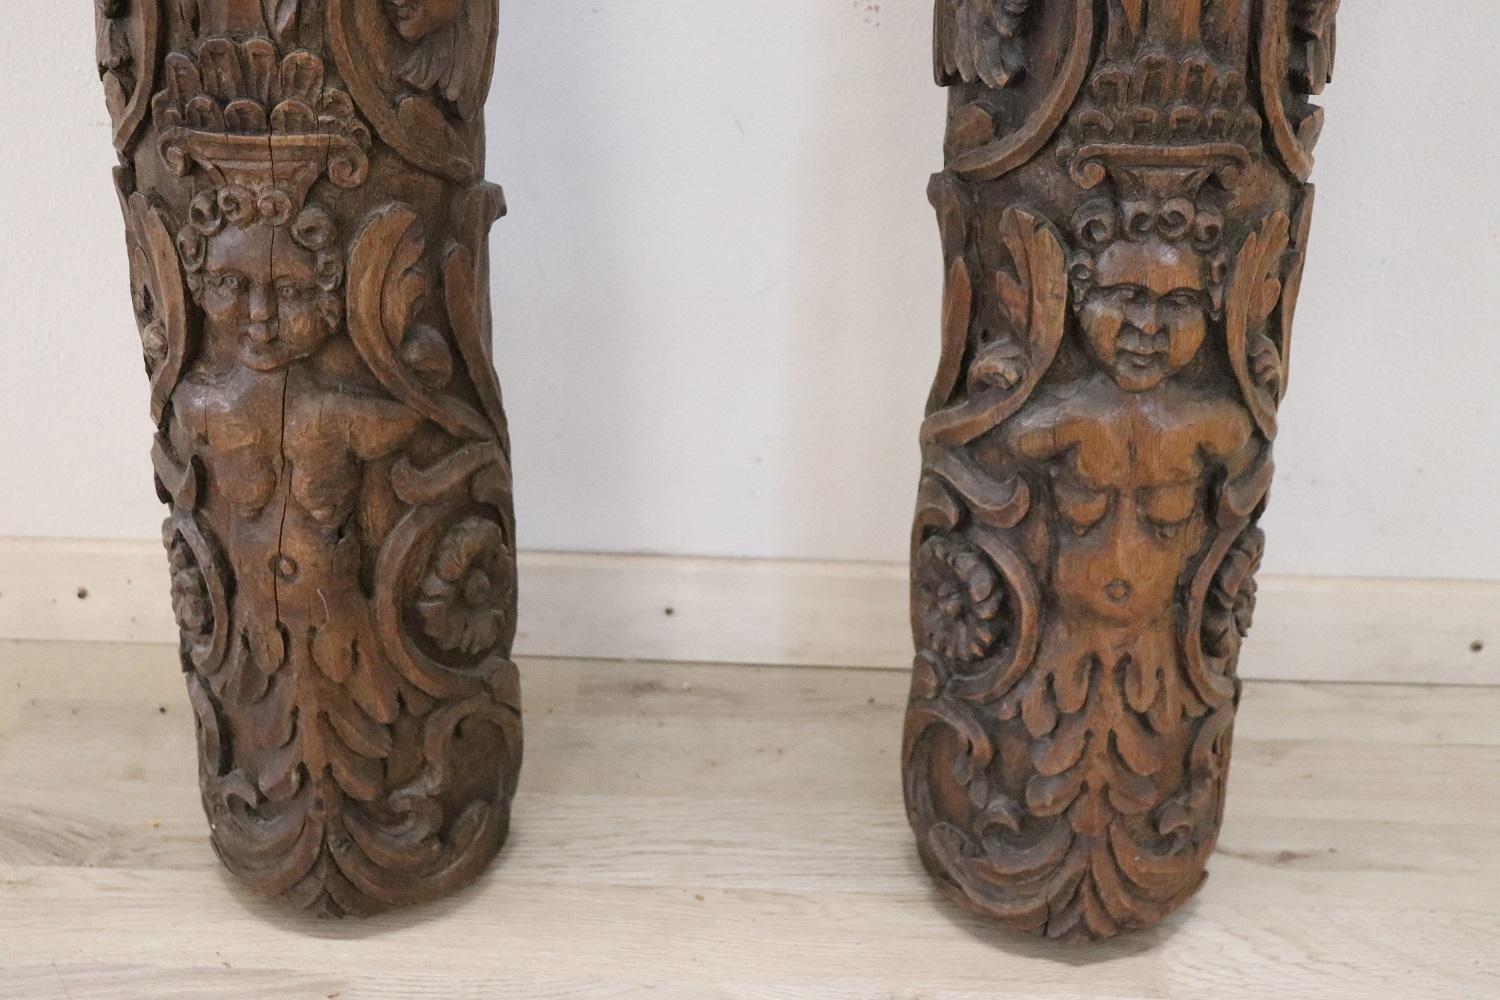 Rare 18th century pair of antique walnut wood columns. Spectacular hand-carved decoration in wood.